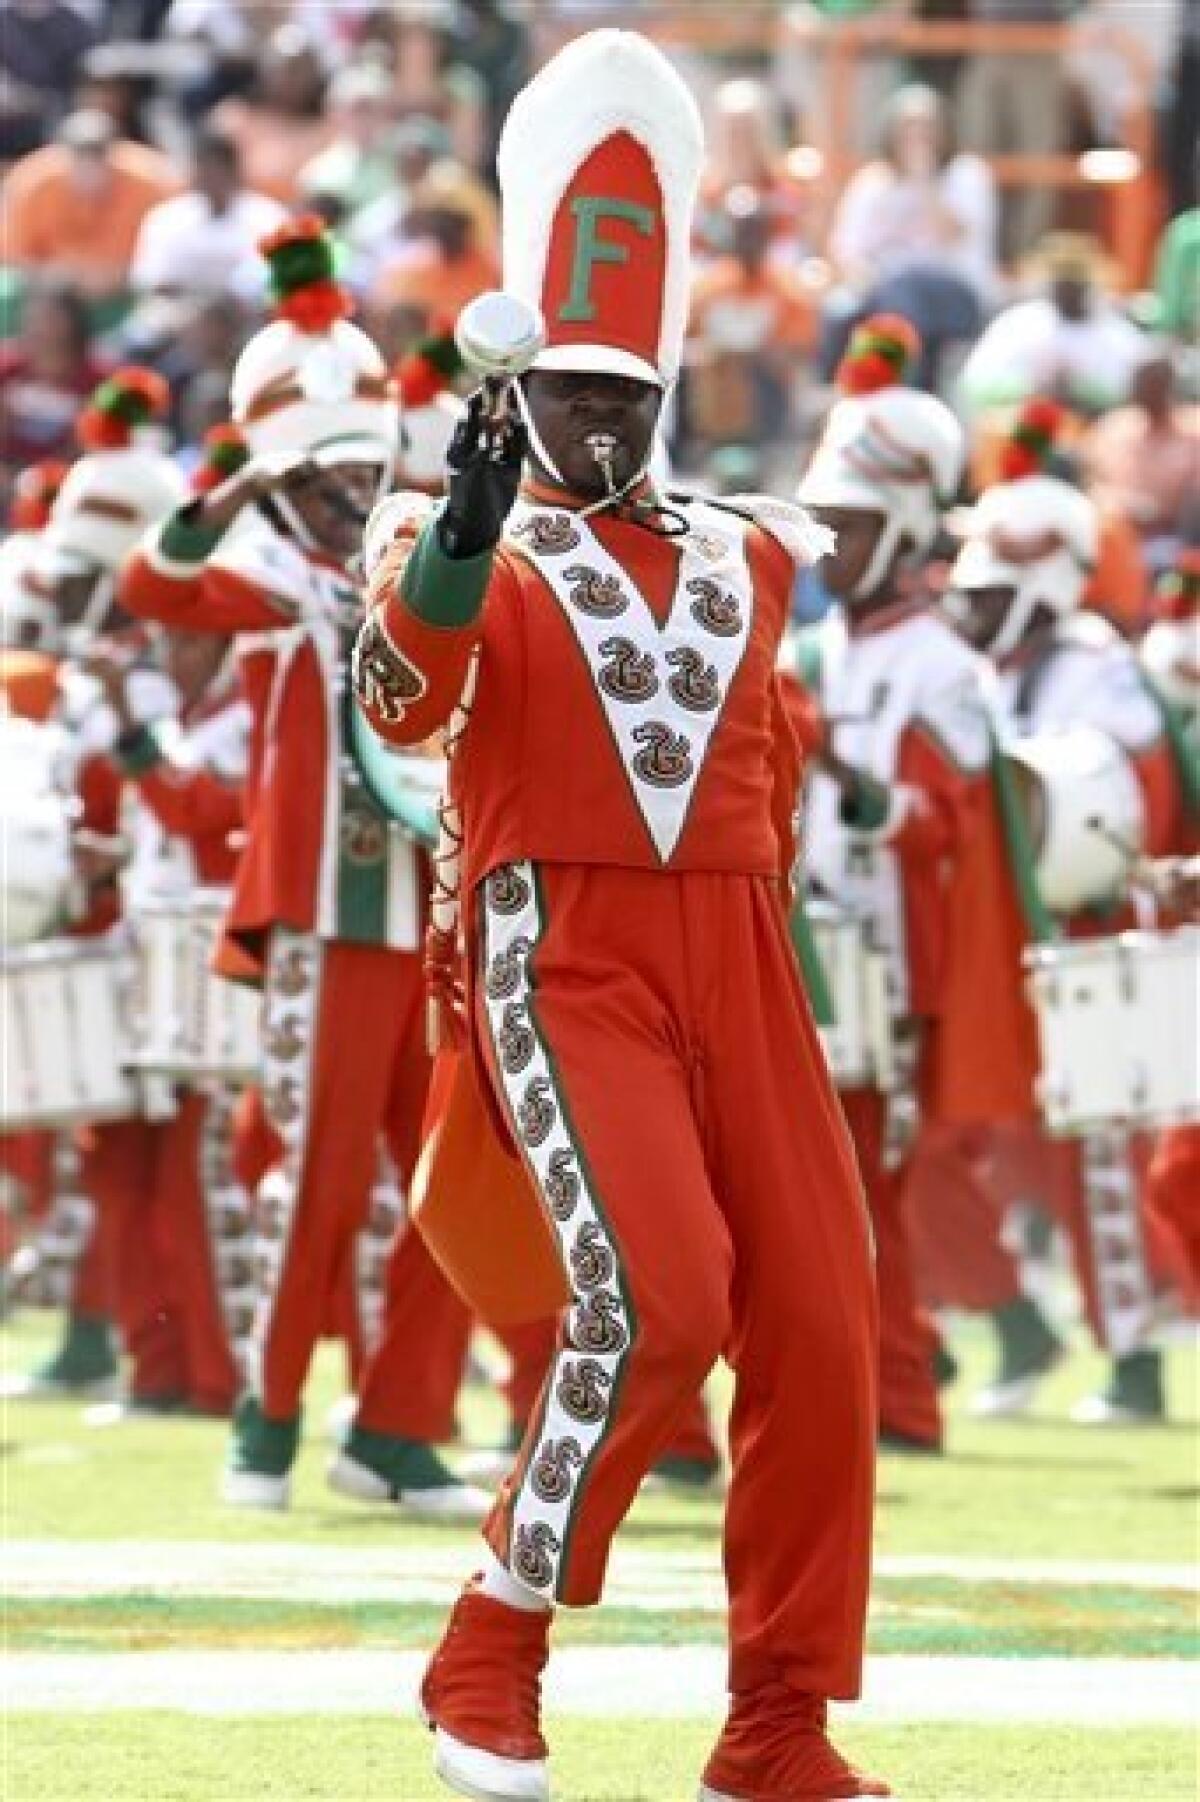 FAMU's Marching 100 Band (@themarching100) • Instagram photos and videos